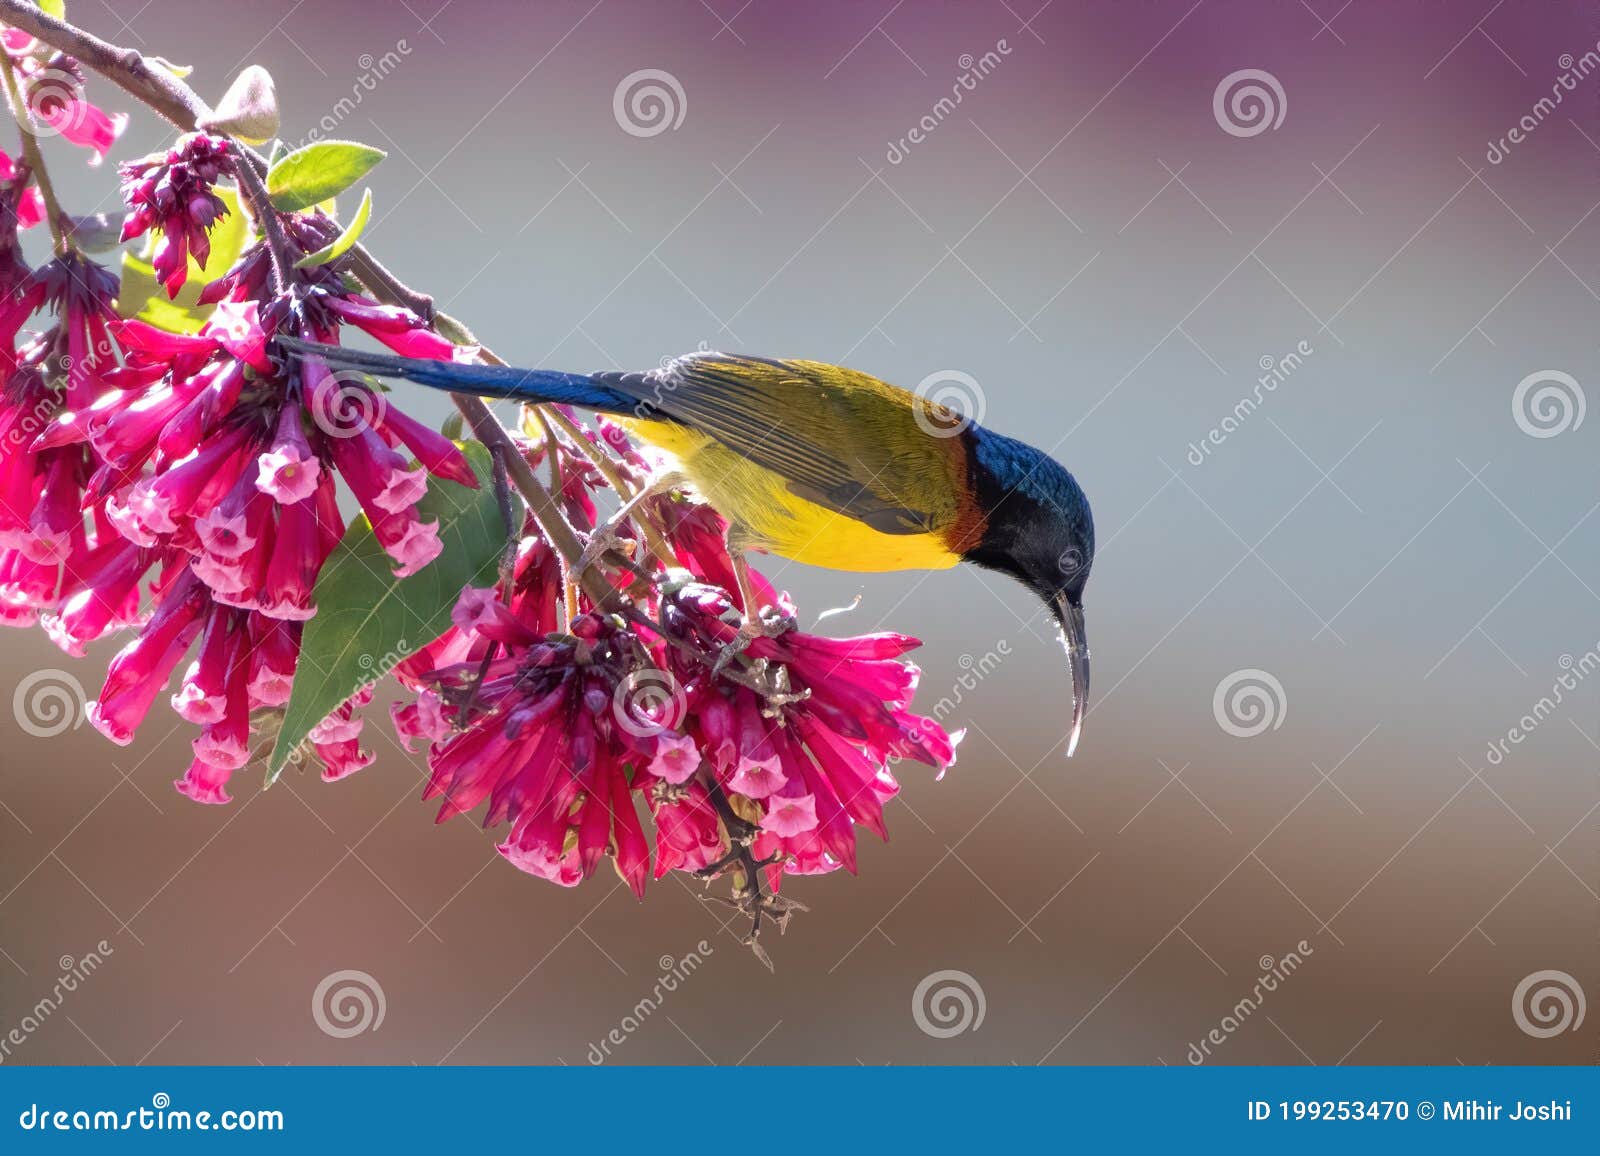 Male Green-tailed Sunbird Photographed in Sattal, India Stock Photo ...